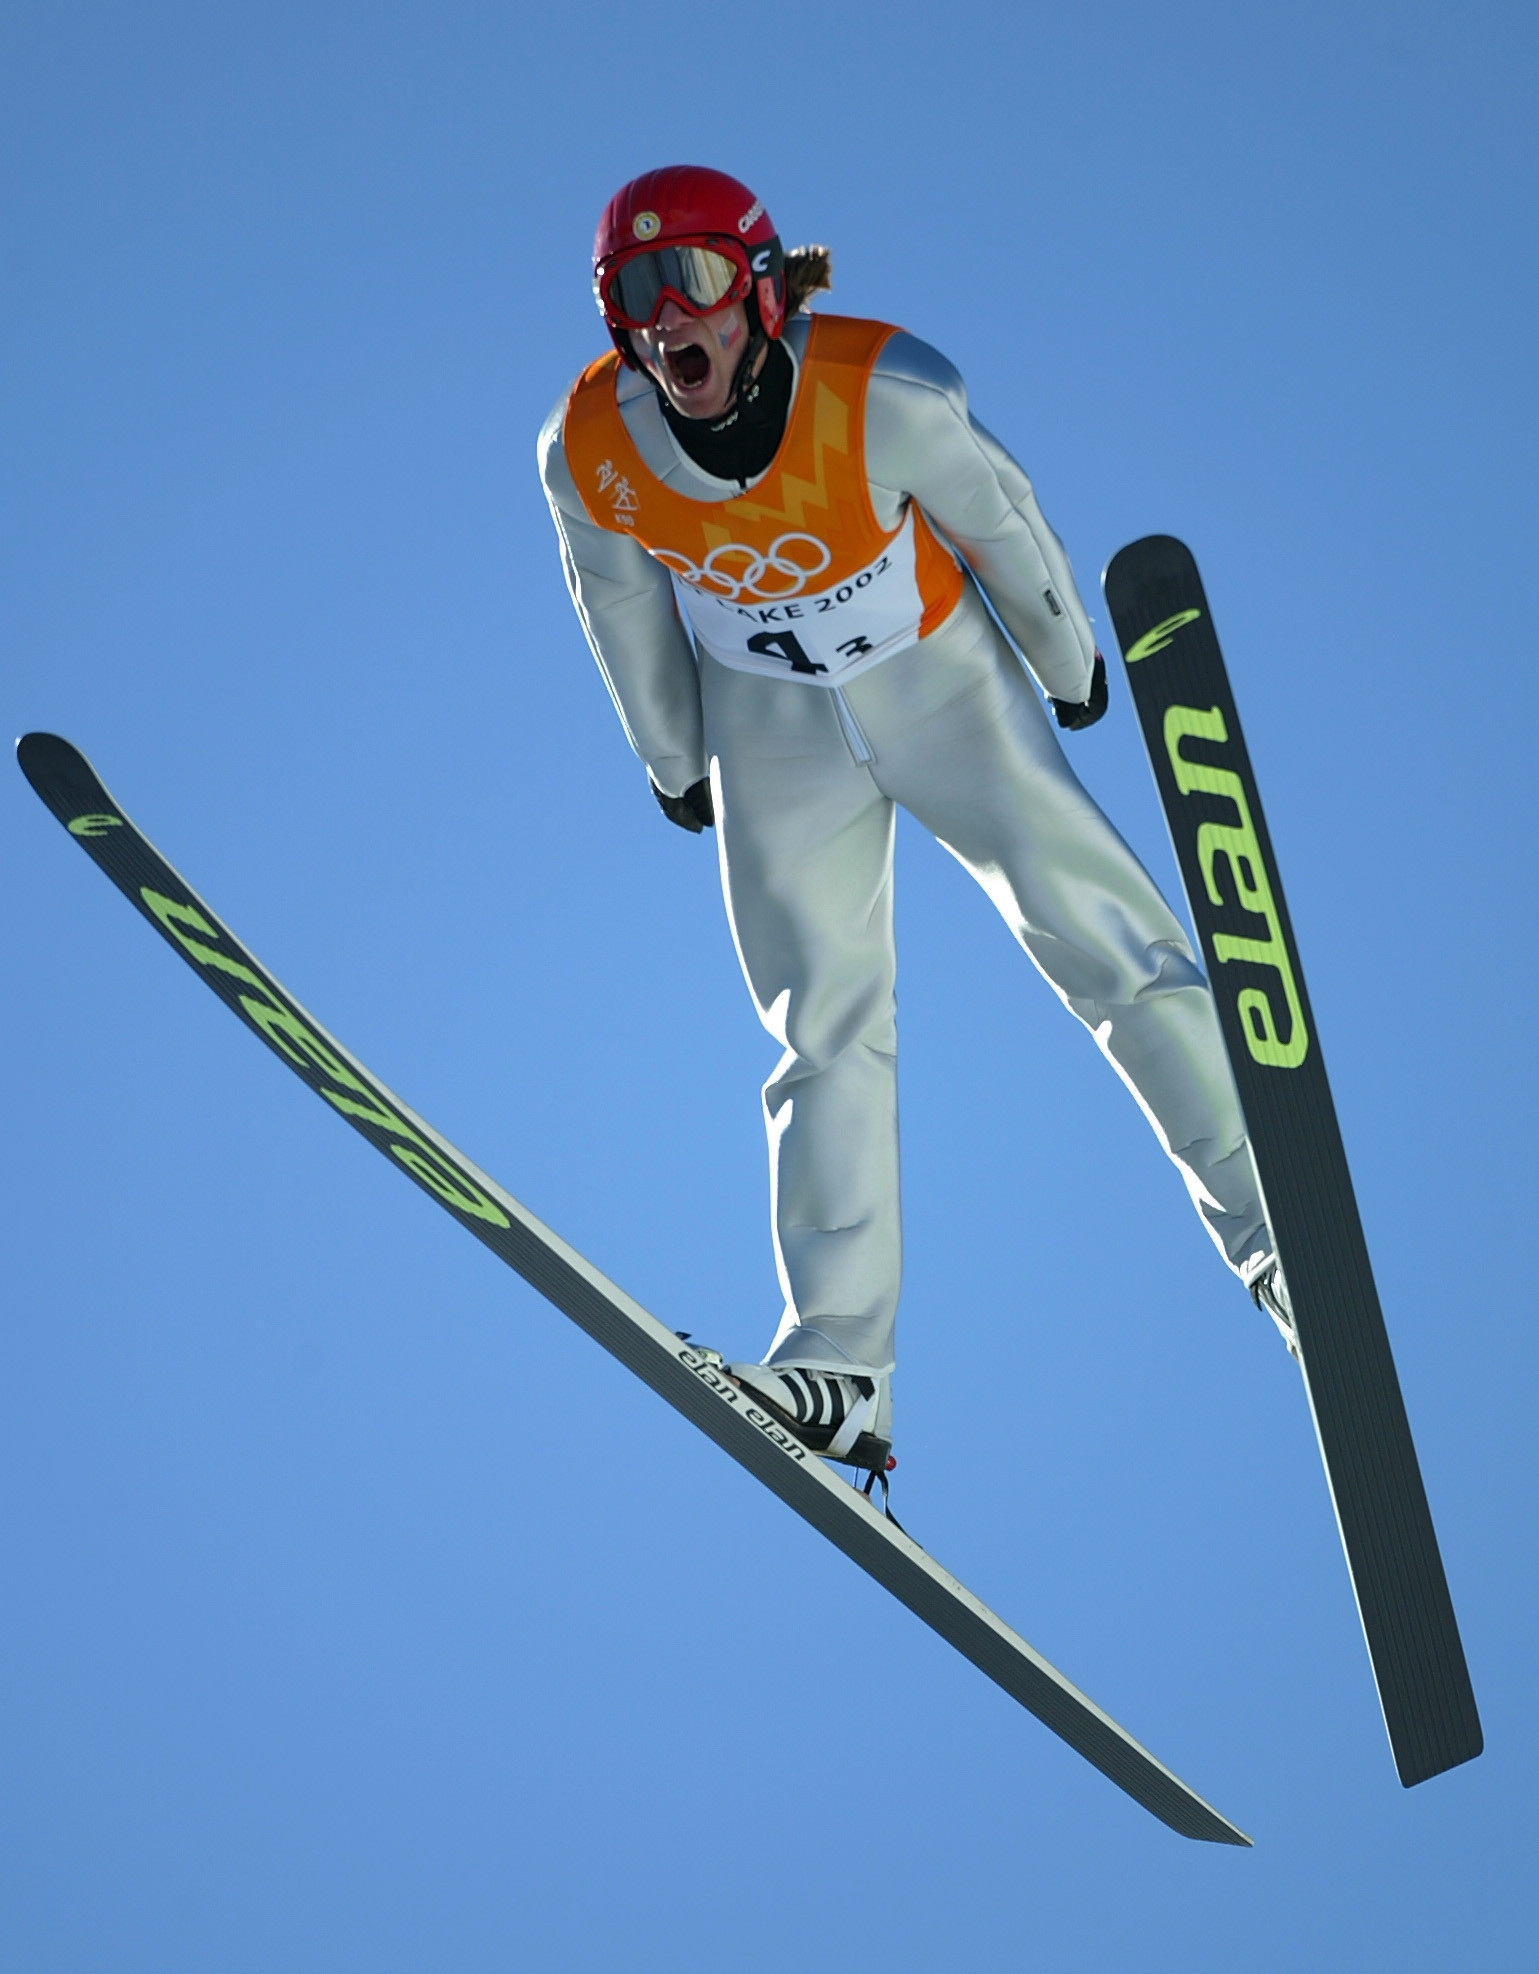 Former Nordic combined skier Hermansky competed at the 2002 Winter Olympics in Salt Lake City ©Getty Images